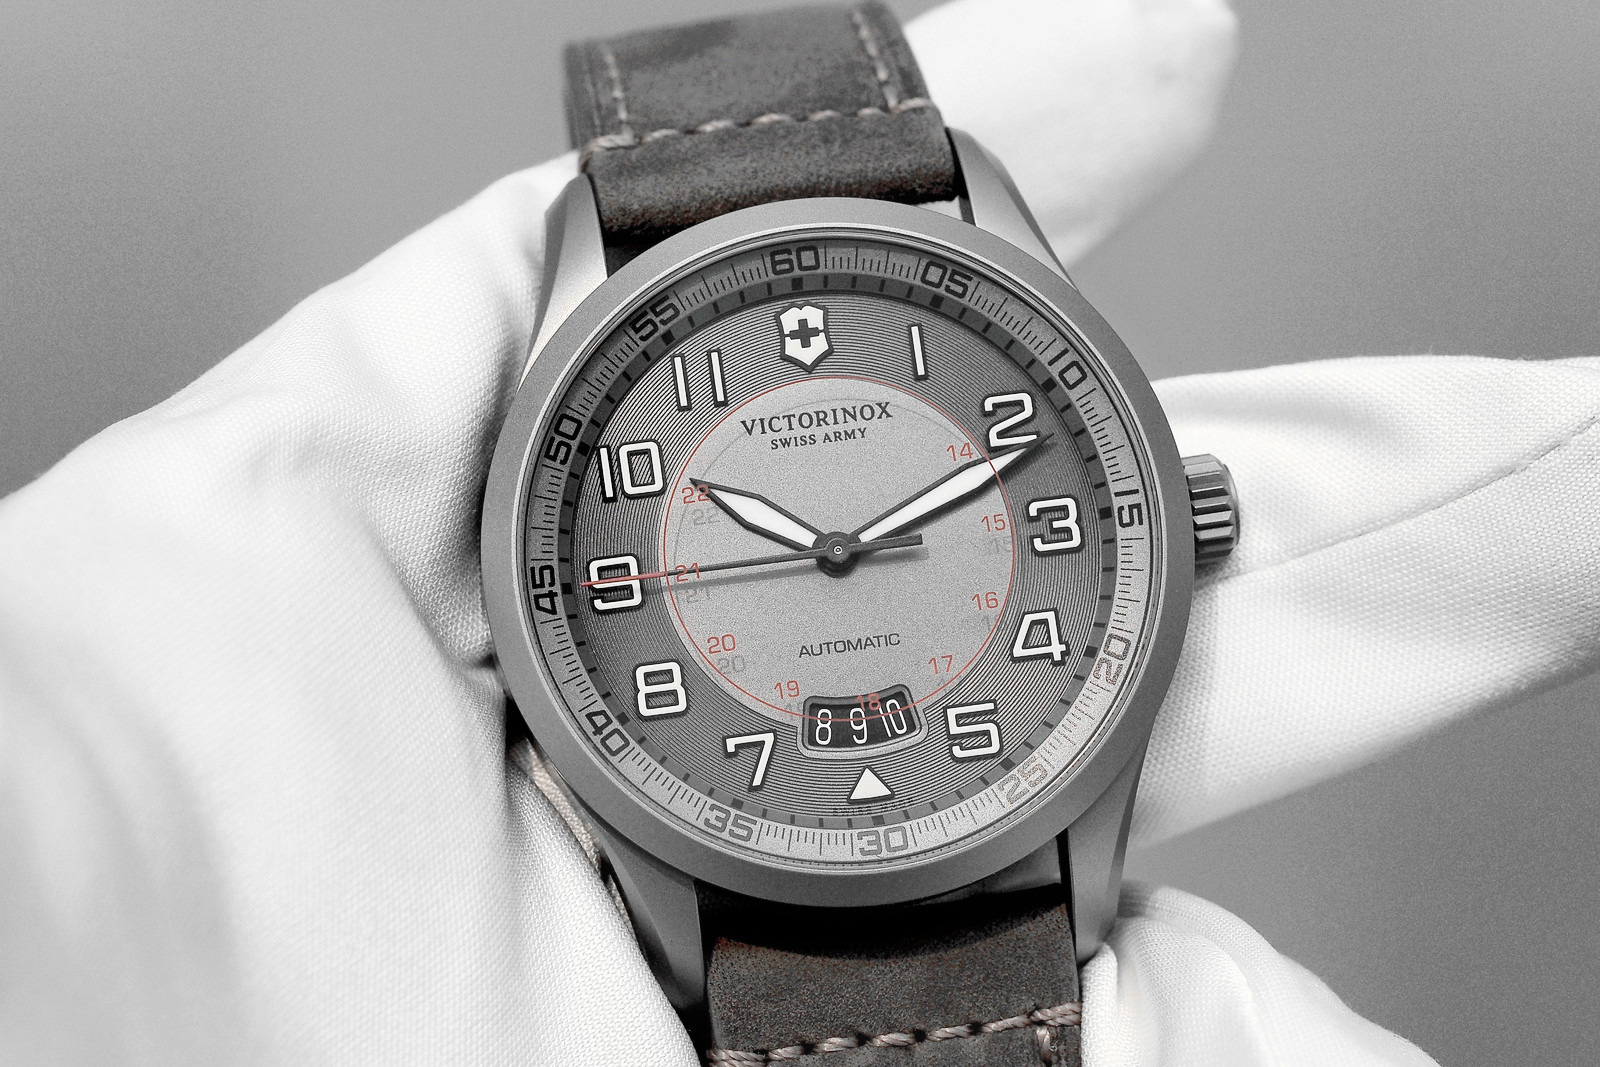 The Victorinox Airboss Automatic 